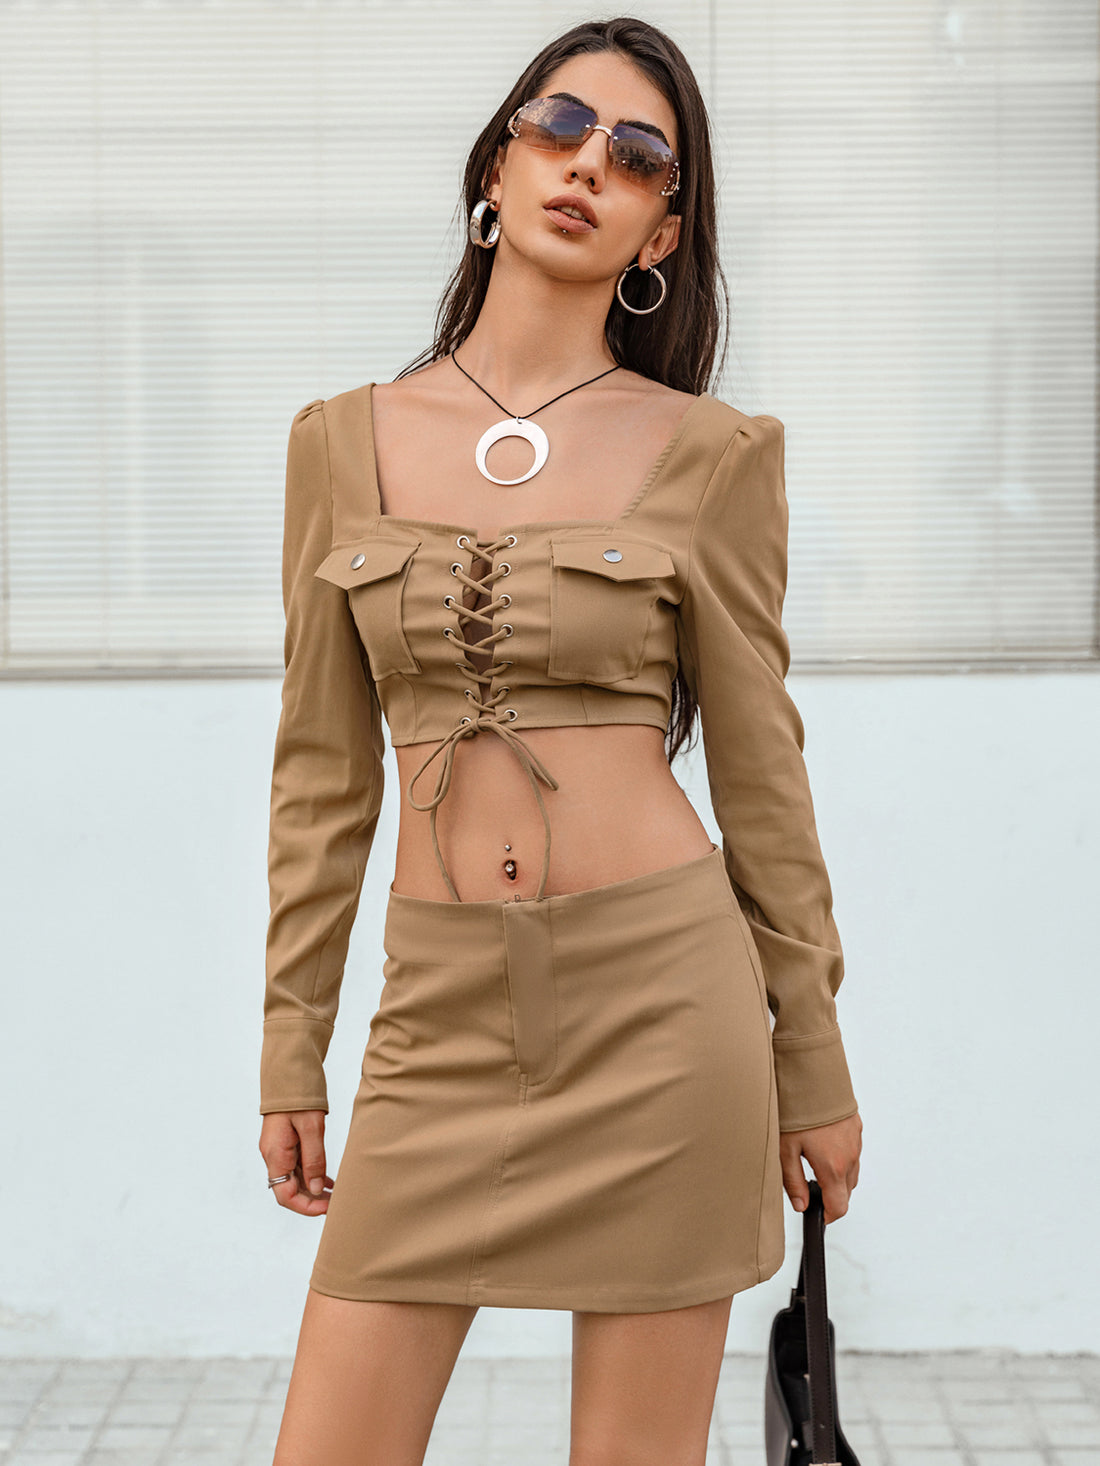 Lace-Up Cropped Top and Skirt Set